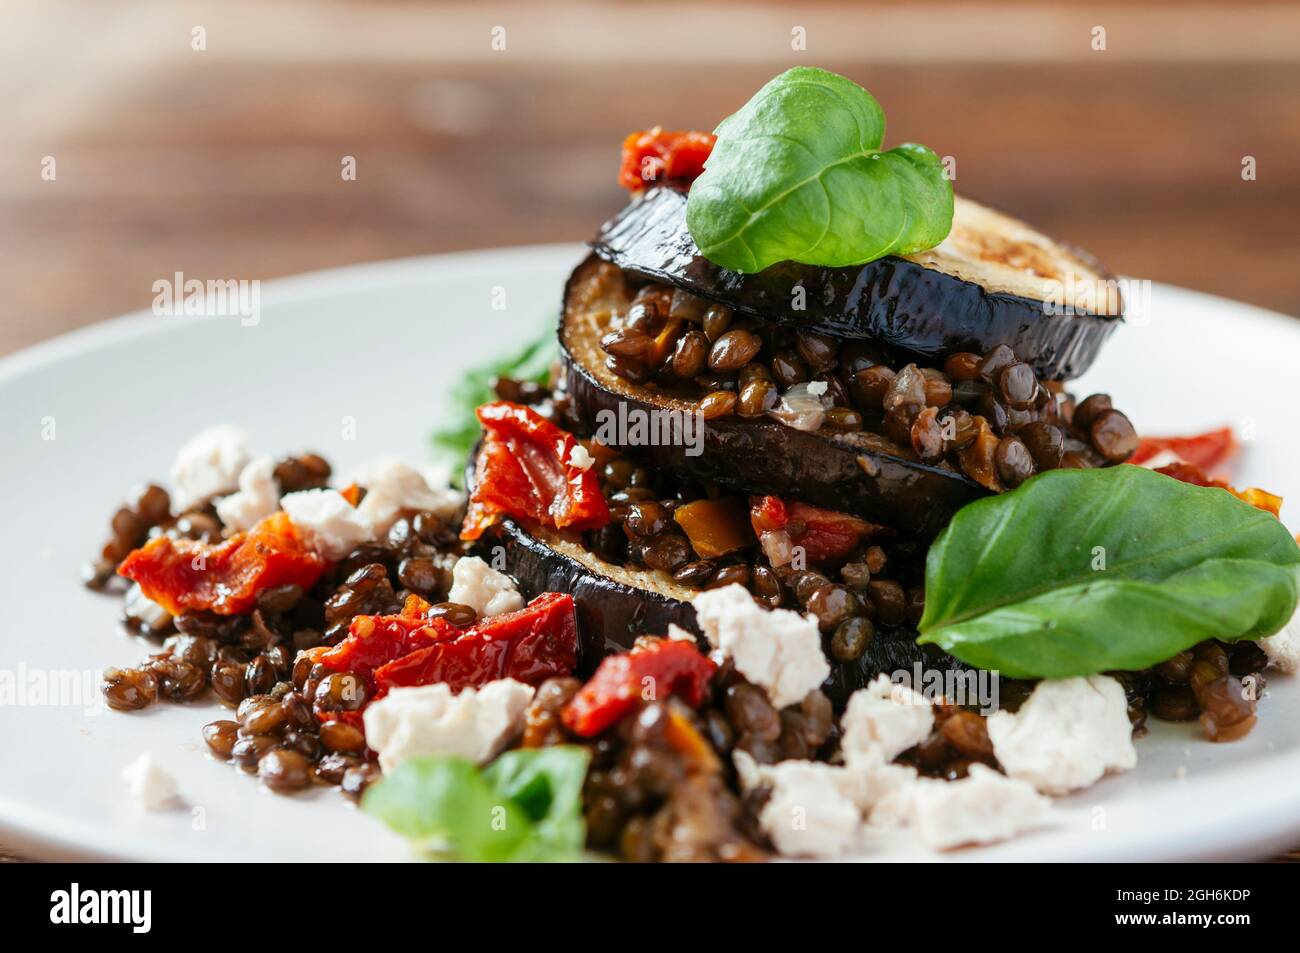 Eggplant lentil stacks with soy cheese, sun dried tomatoes and basil leaves. Stock Photo